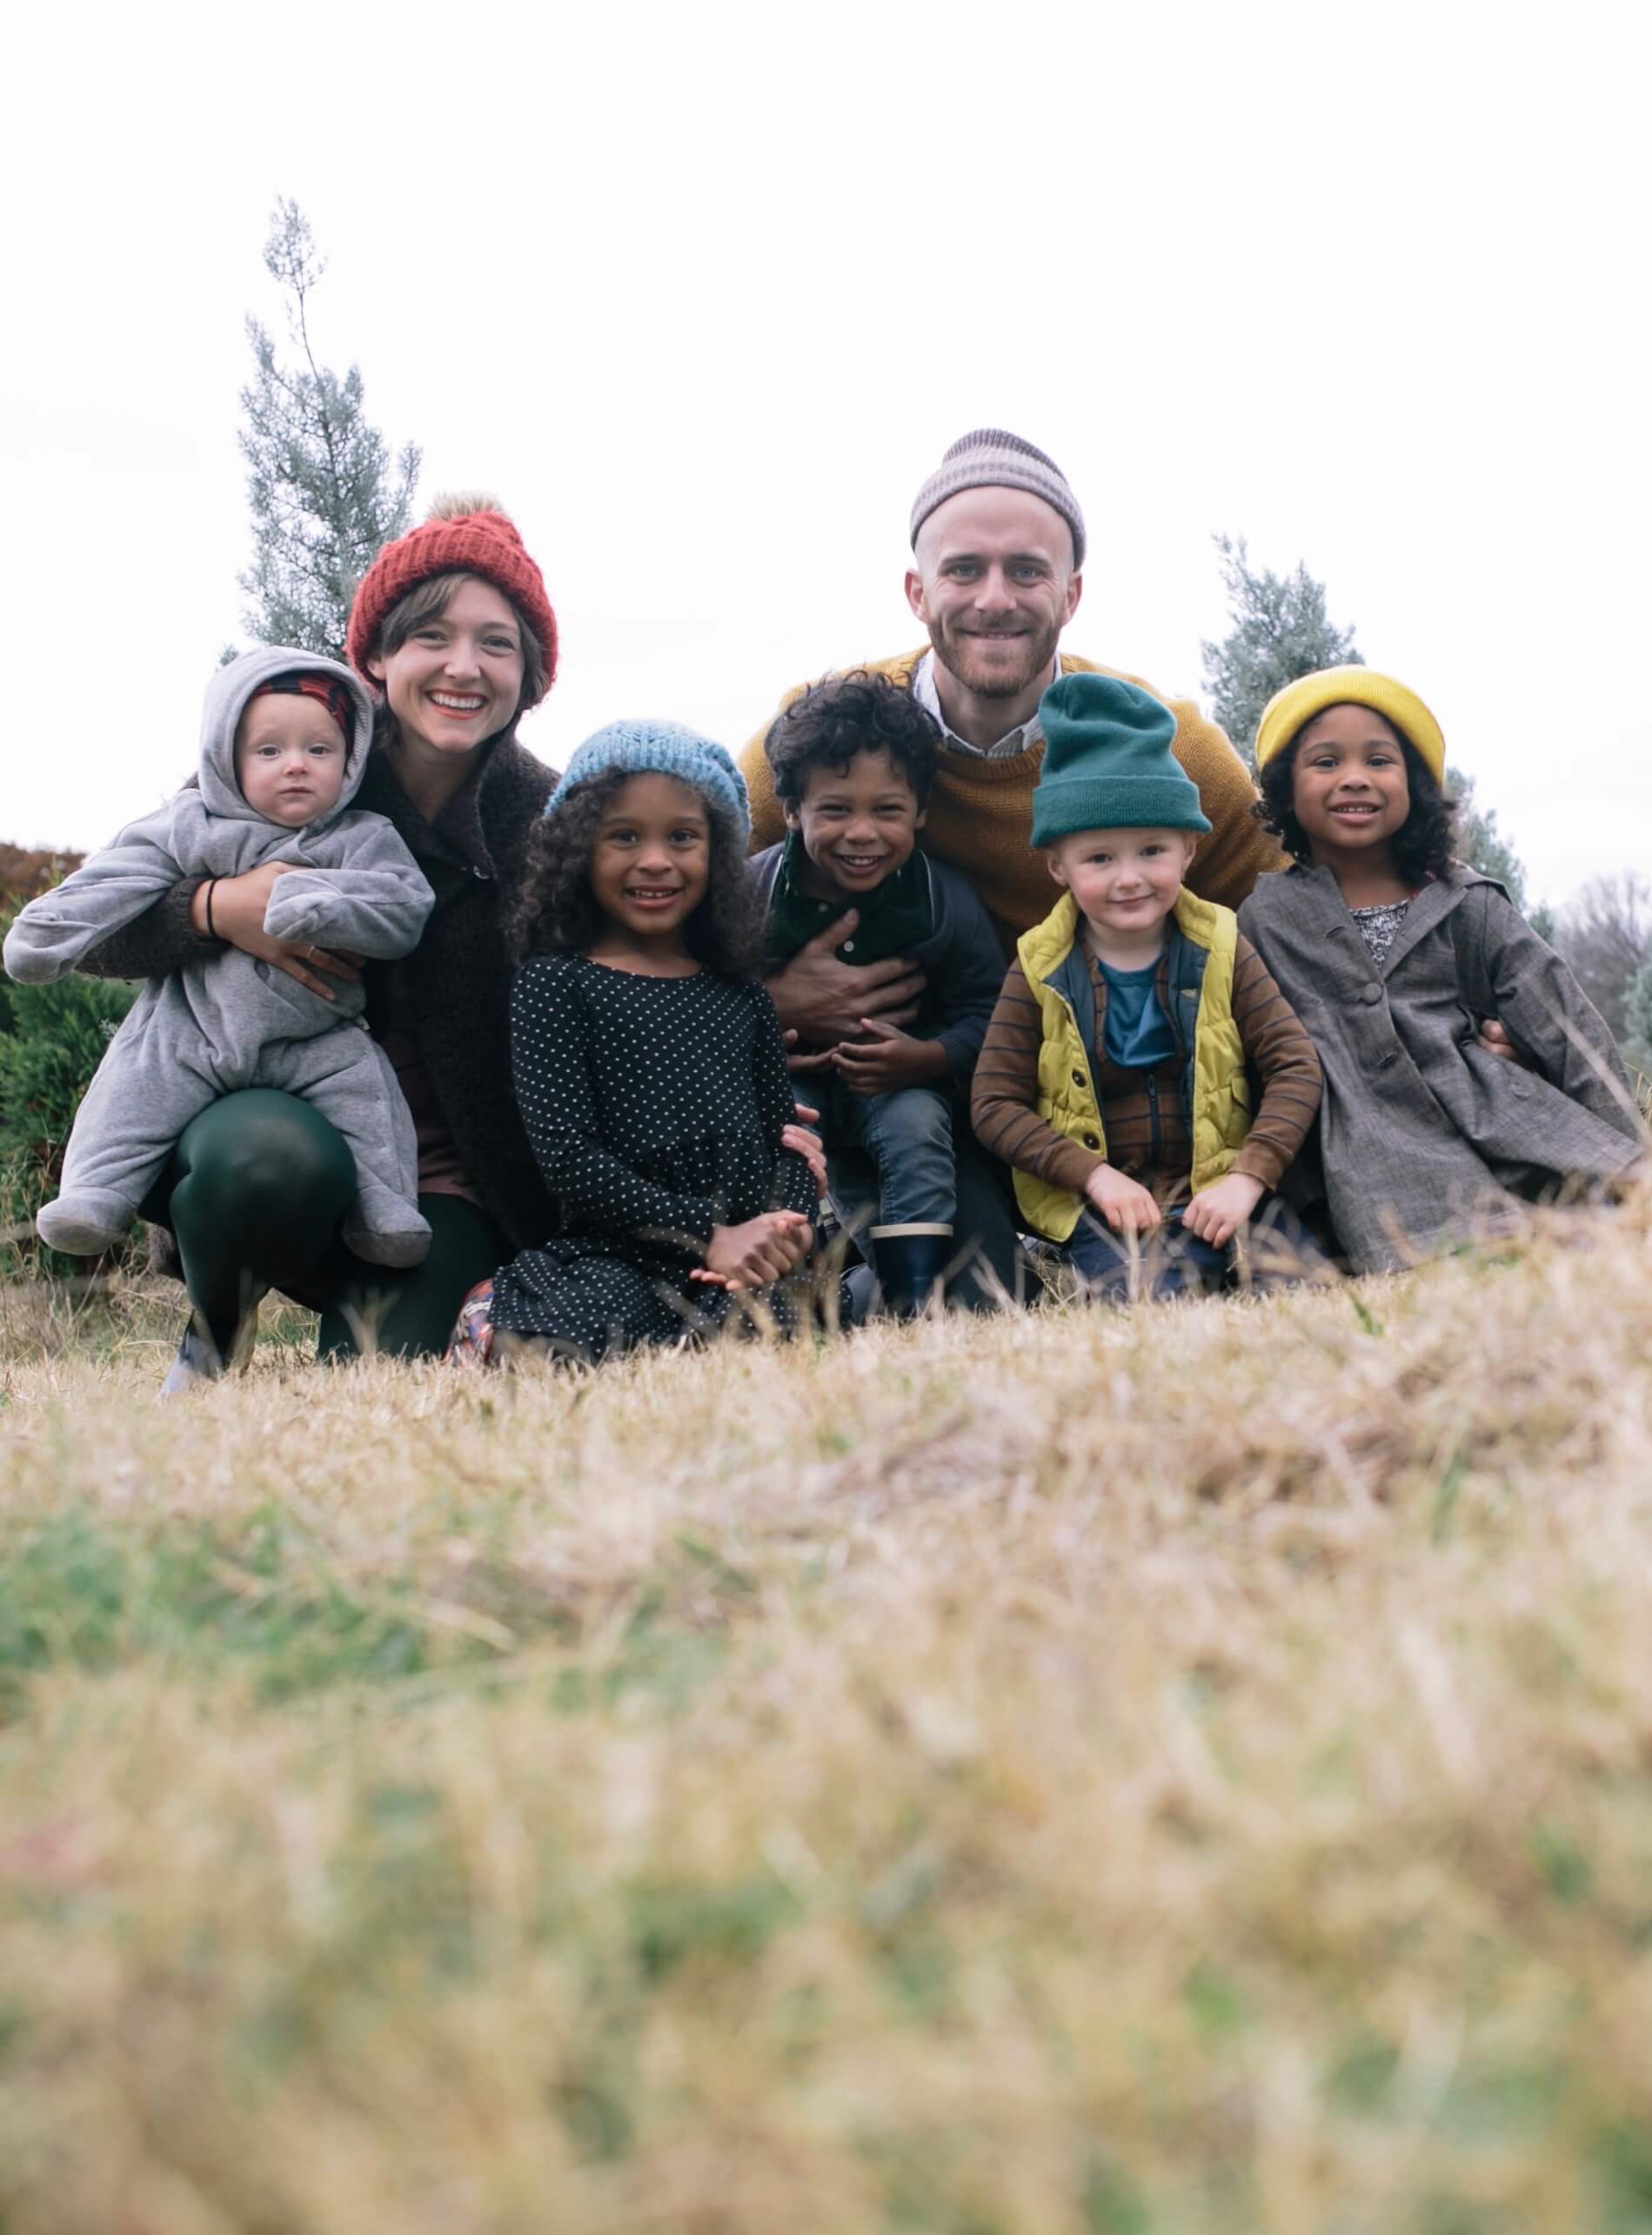 Family photo with parents and five young children all wearing beanies